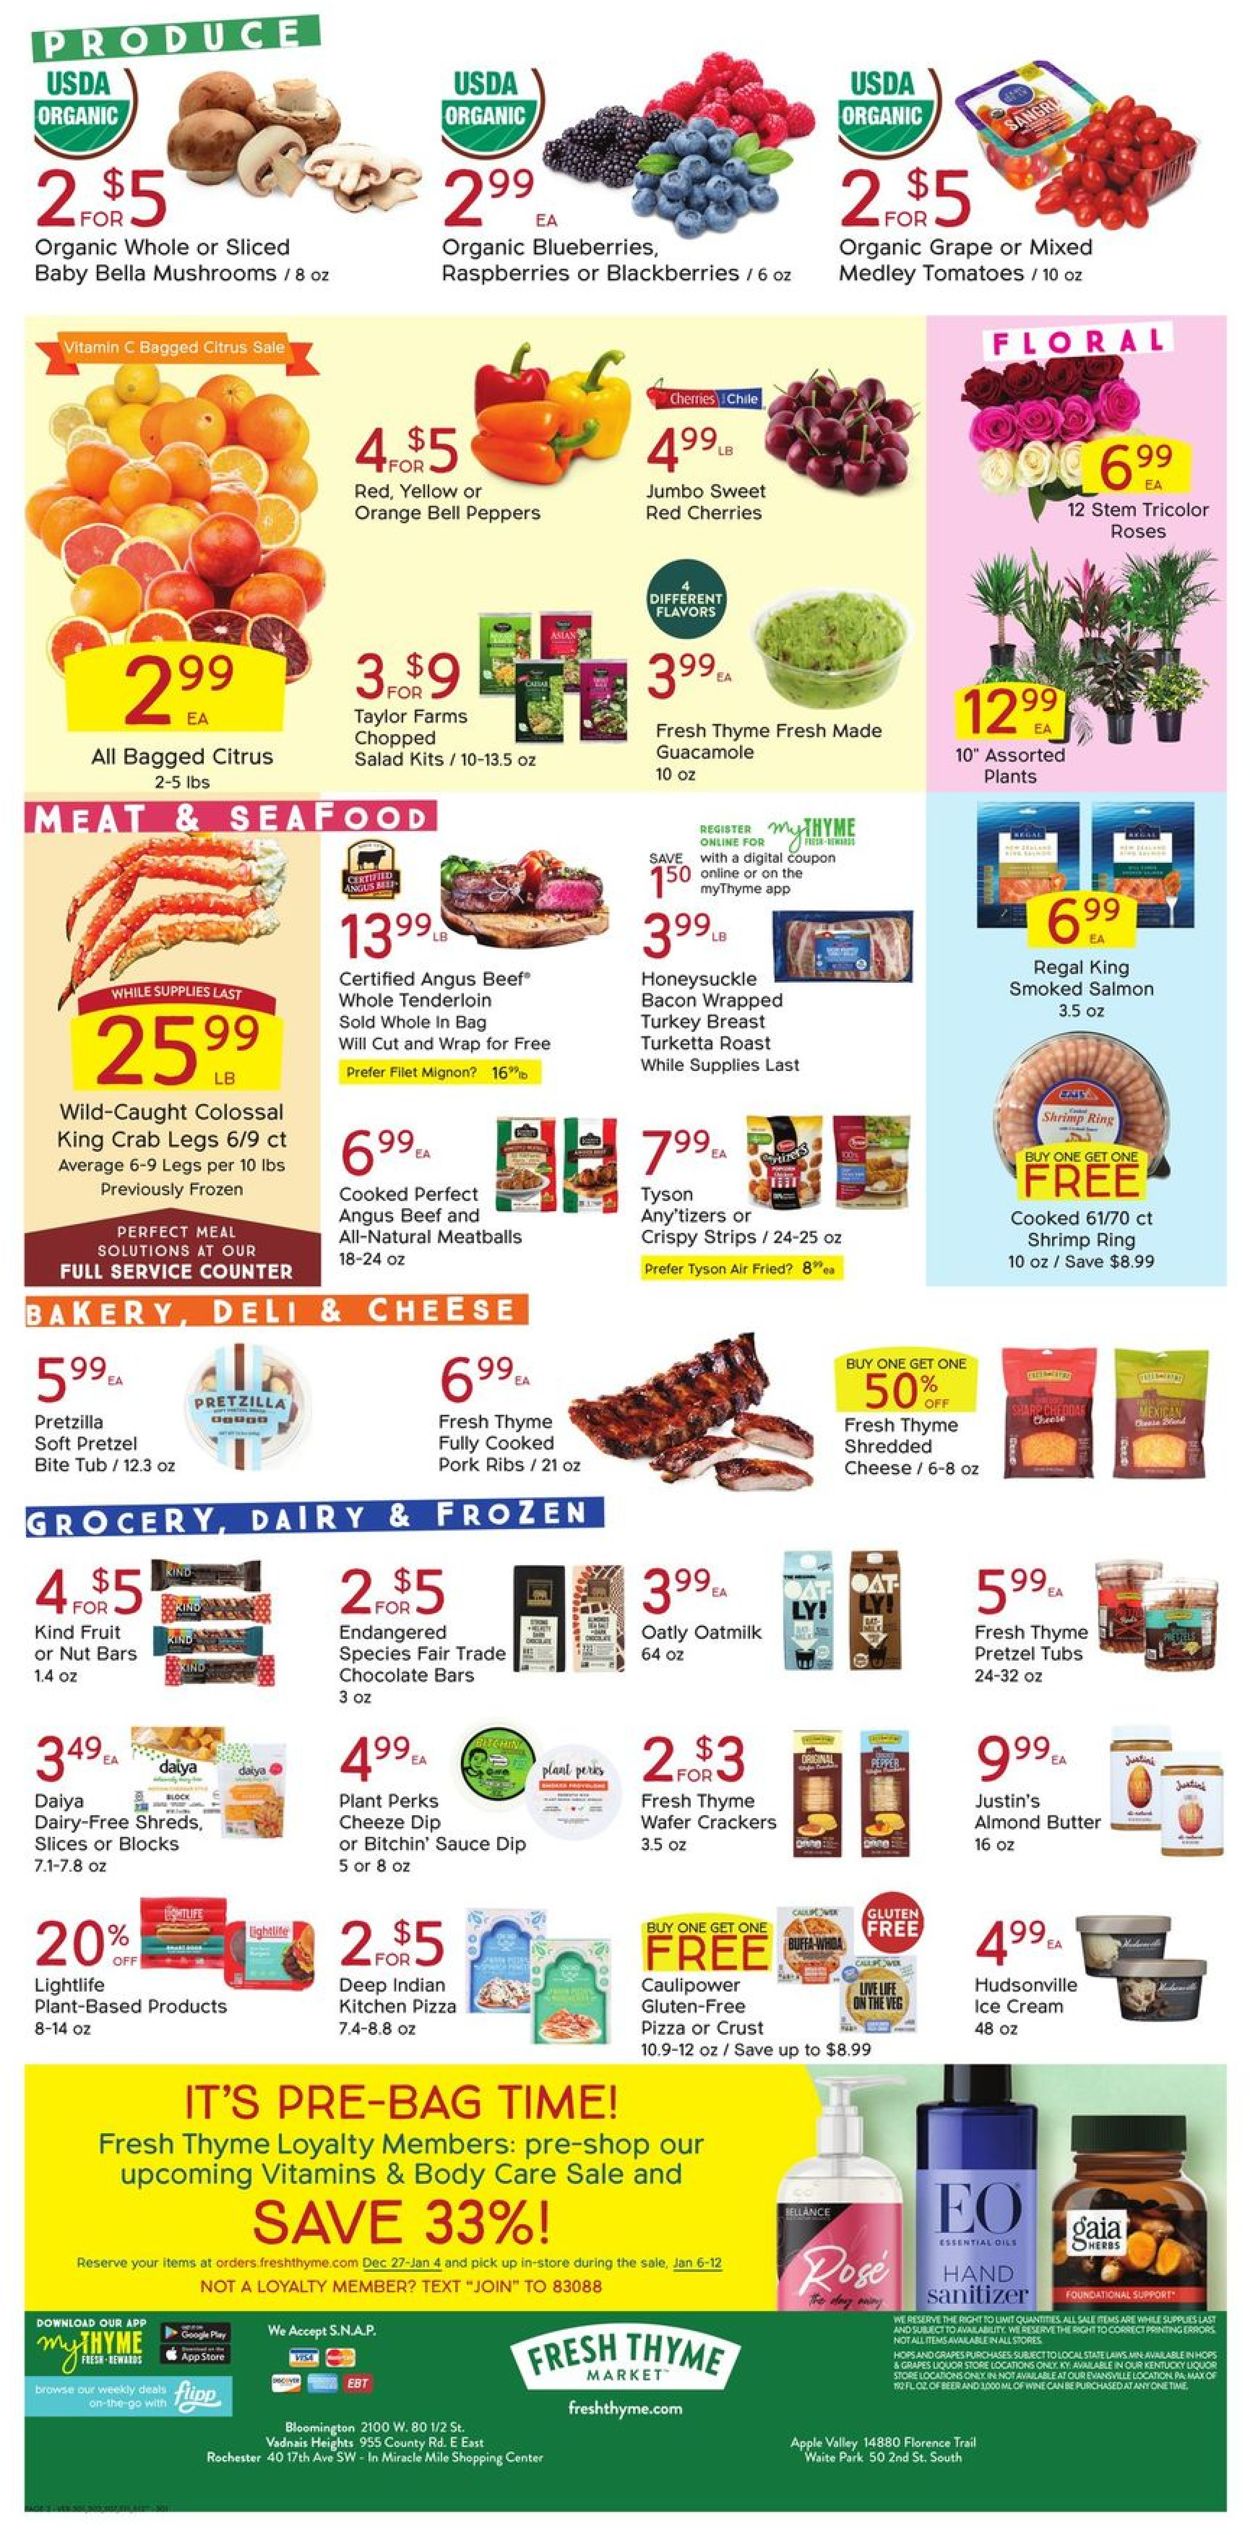 Fresh Thyme Current weekly ad 12/27 - 01/05/2021 [2] - frequent-ads.com